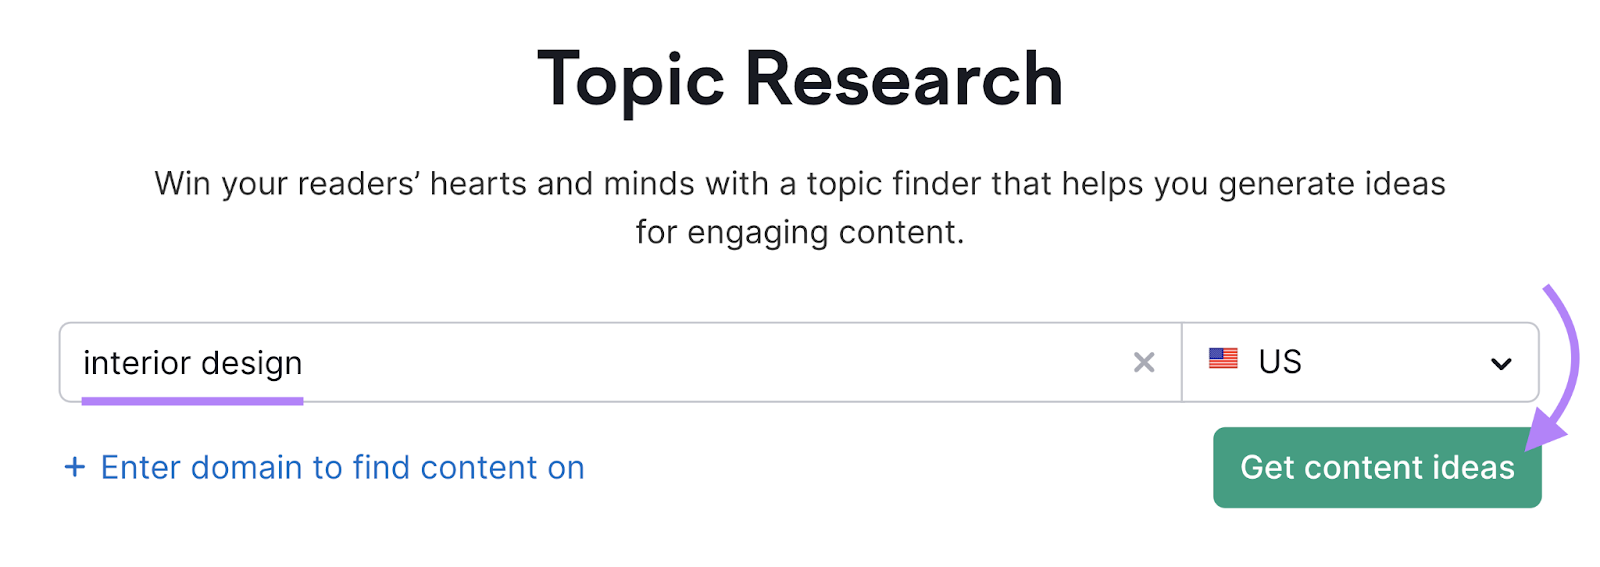 "interior design" entered into the Topic Research search bar